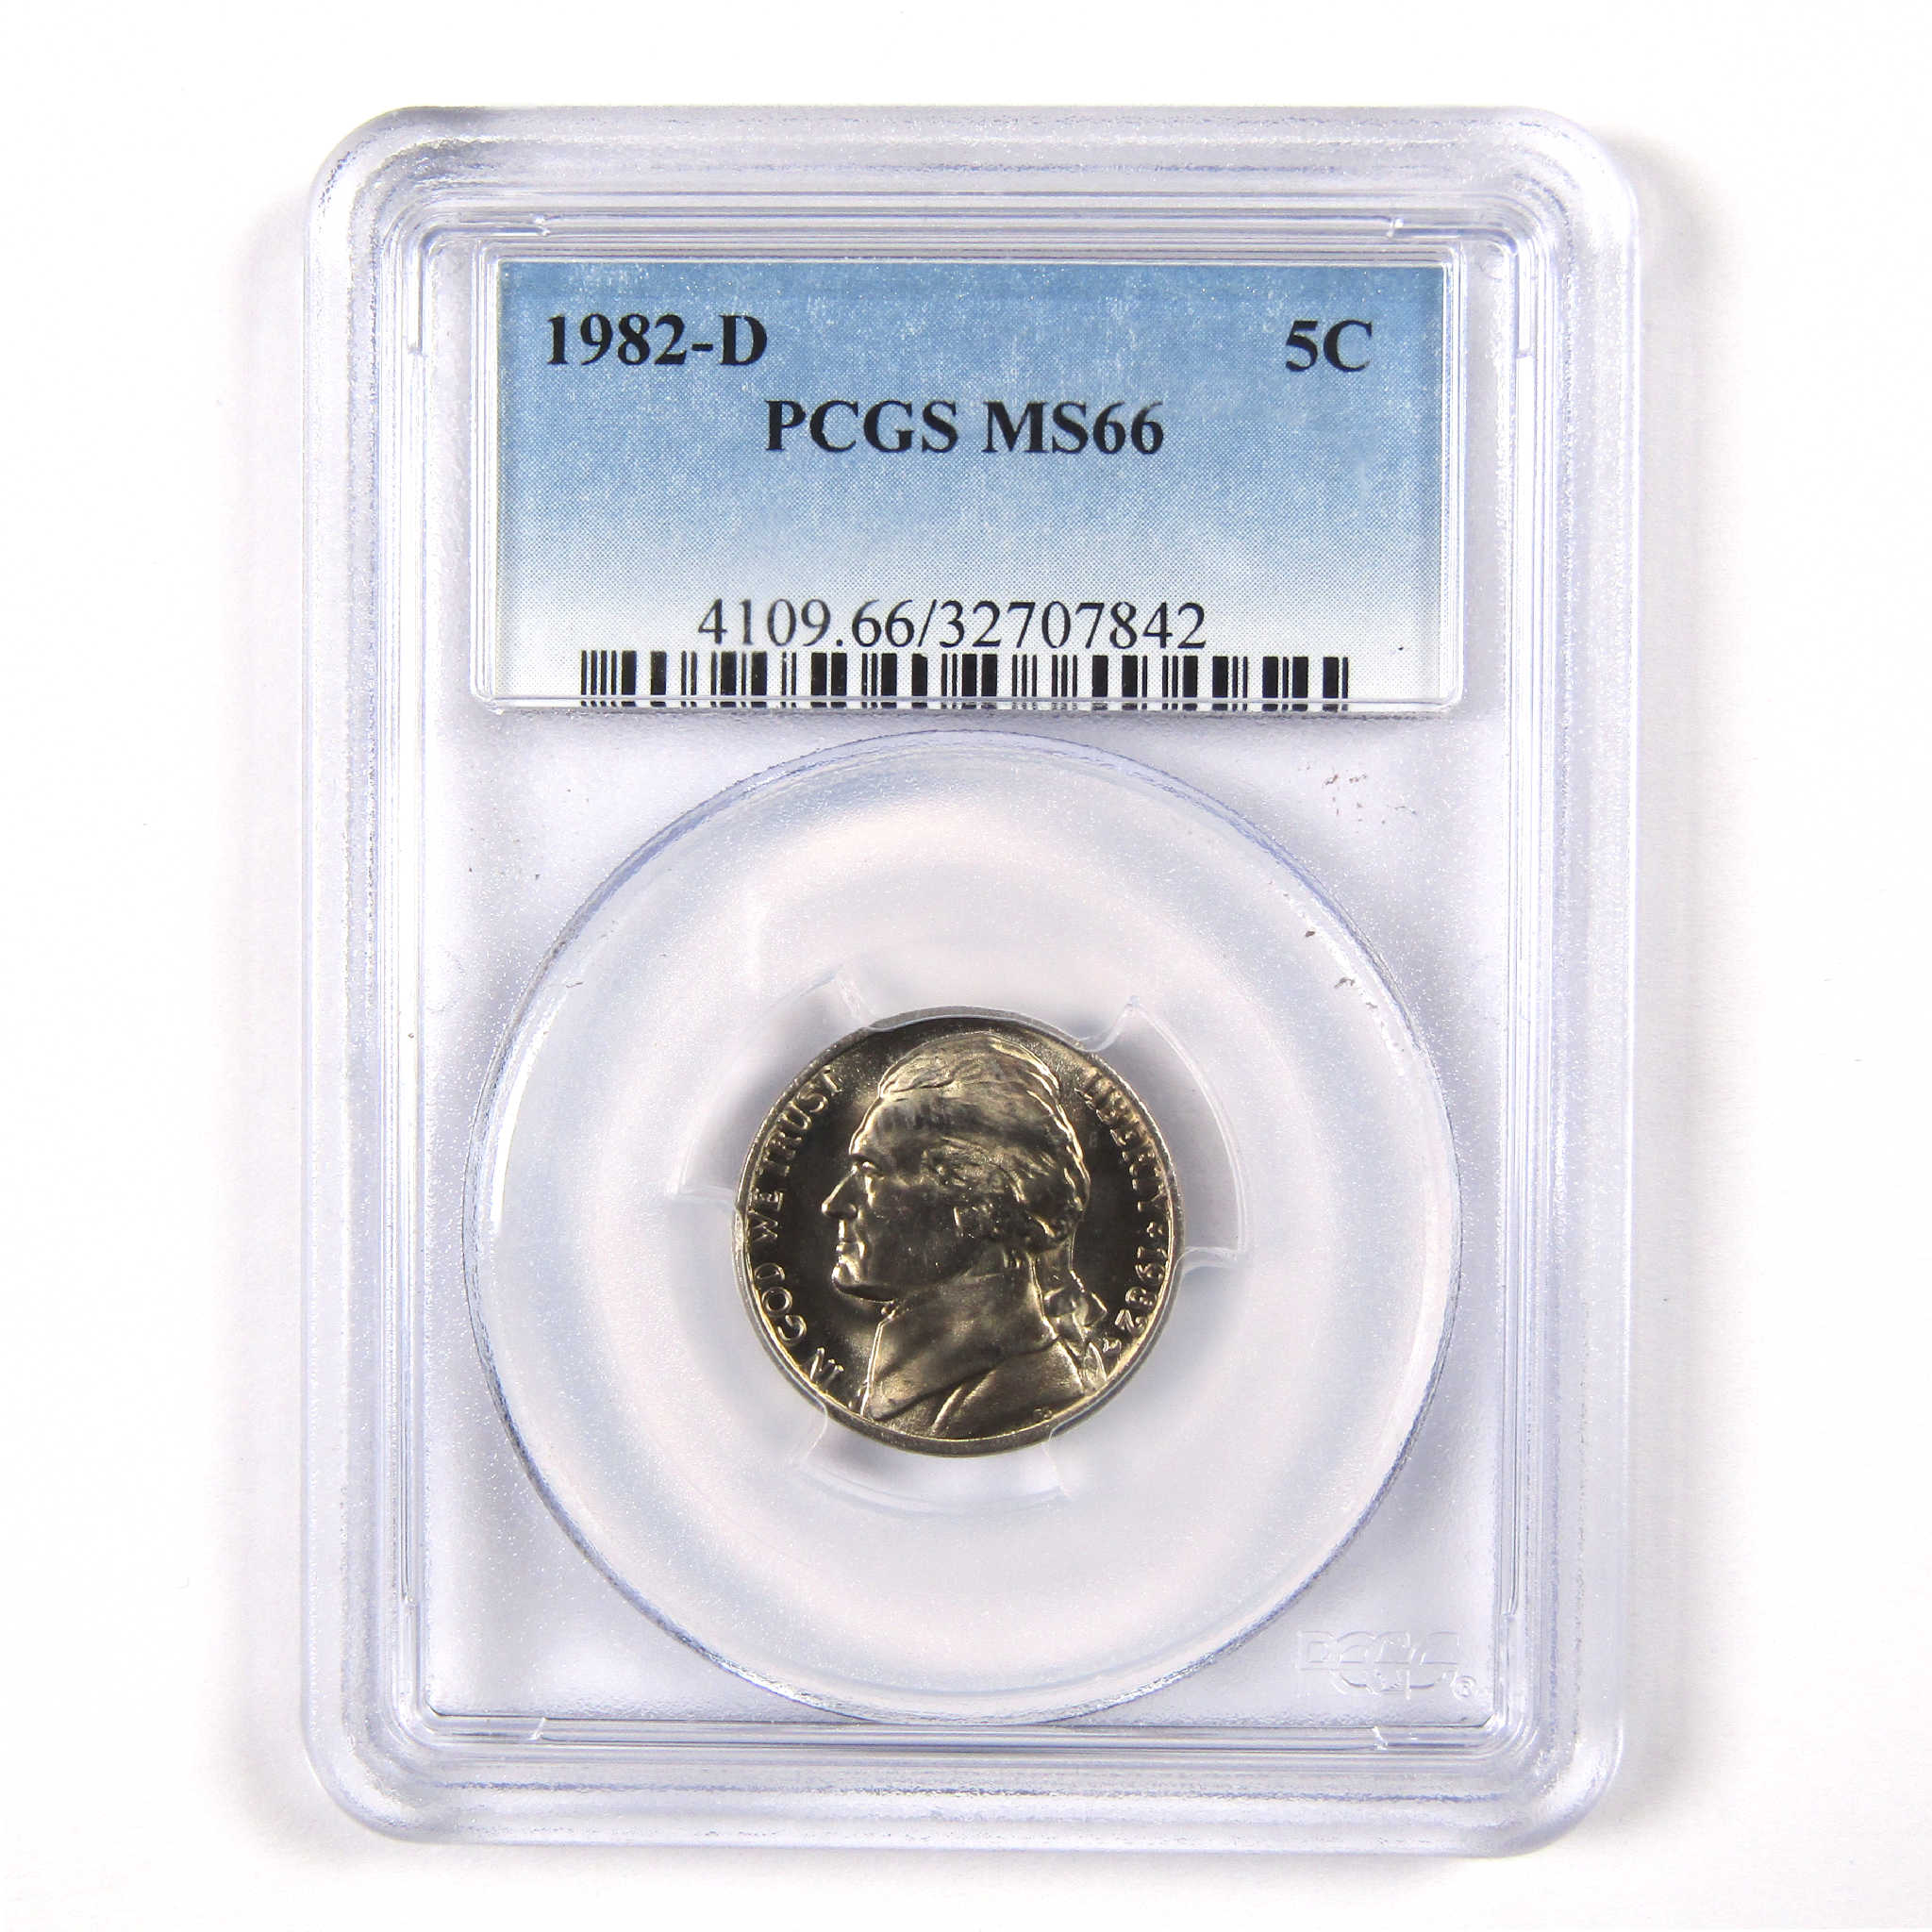 1982 D Jefferson Nickel MS 66 PCGS 5c Uncirculated Coin SKU:CPC5469